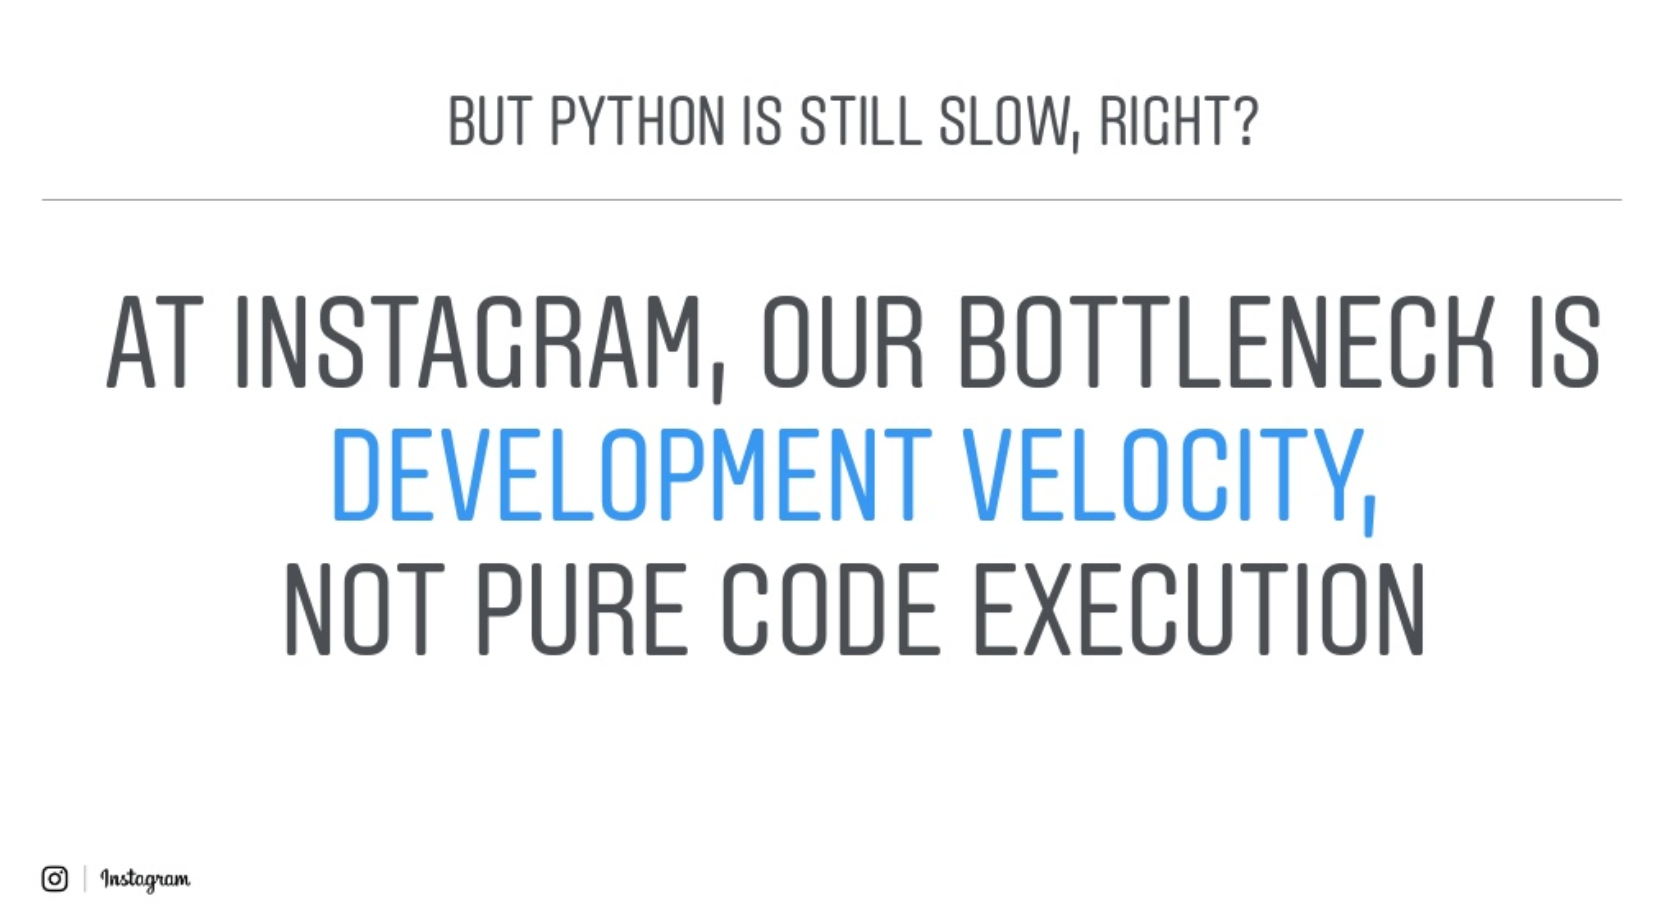 At Instagram, Out bottoleneck is development velocity, not pure code execution